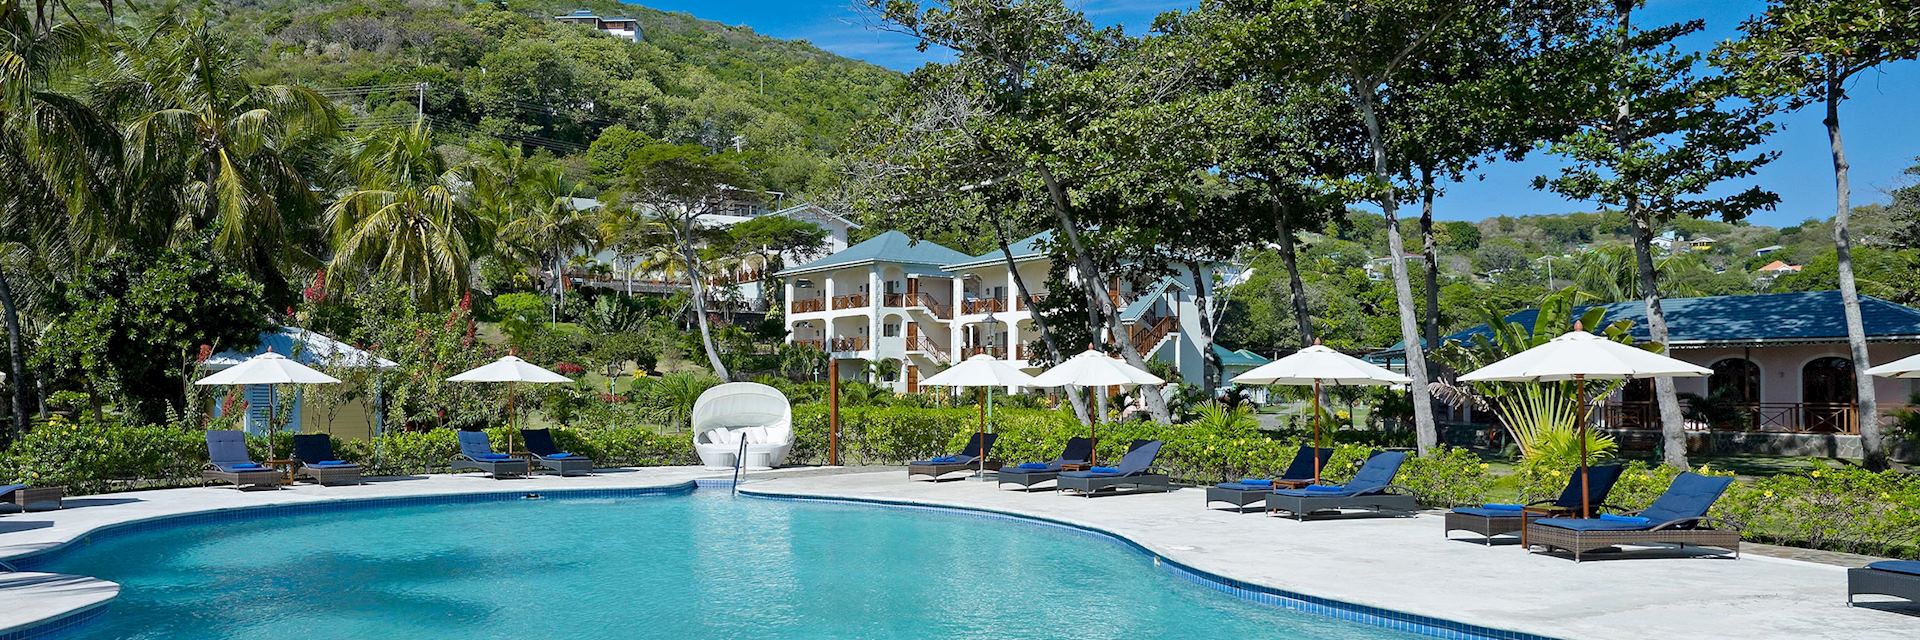 Bequia  Beach Hotel, St Vincent and the Grenadines